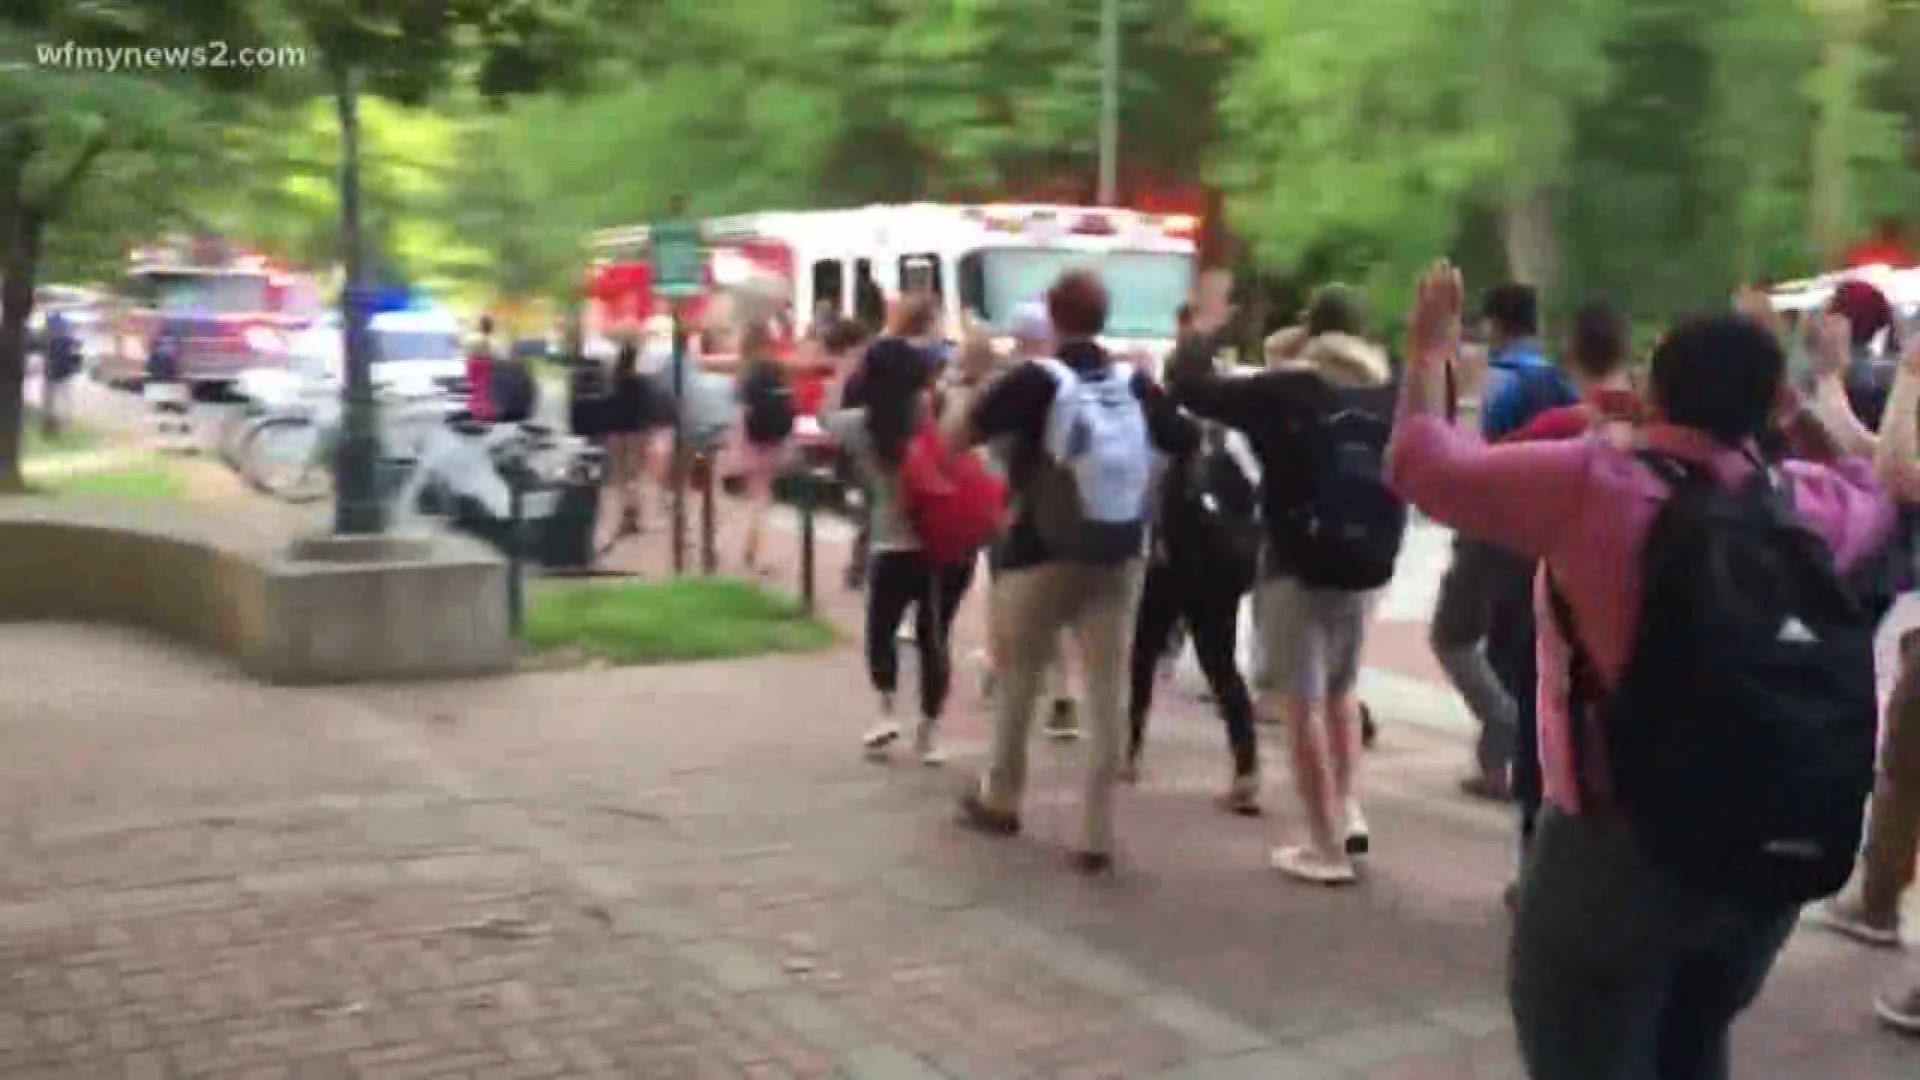 Students had to evacuate or shelter in place. Many posted videos, panicked and afraid.